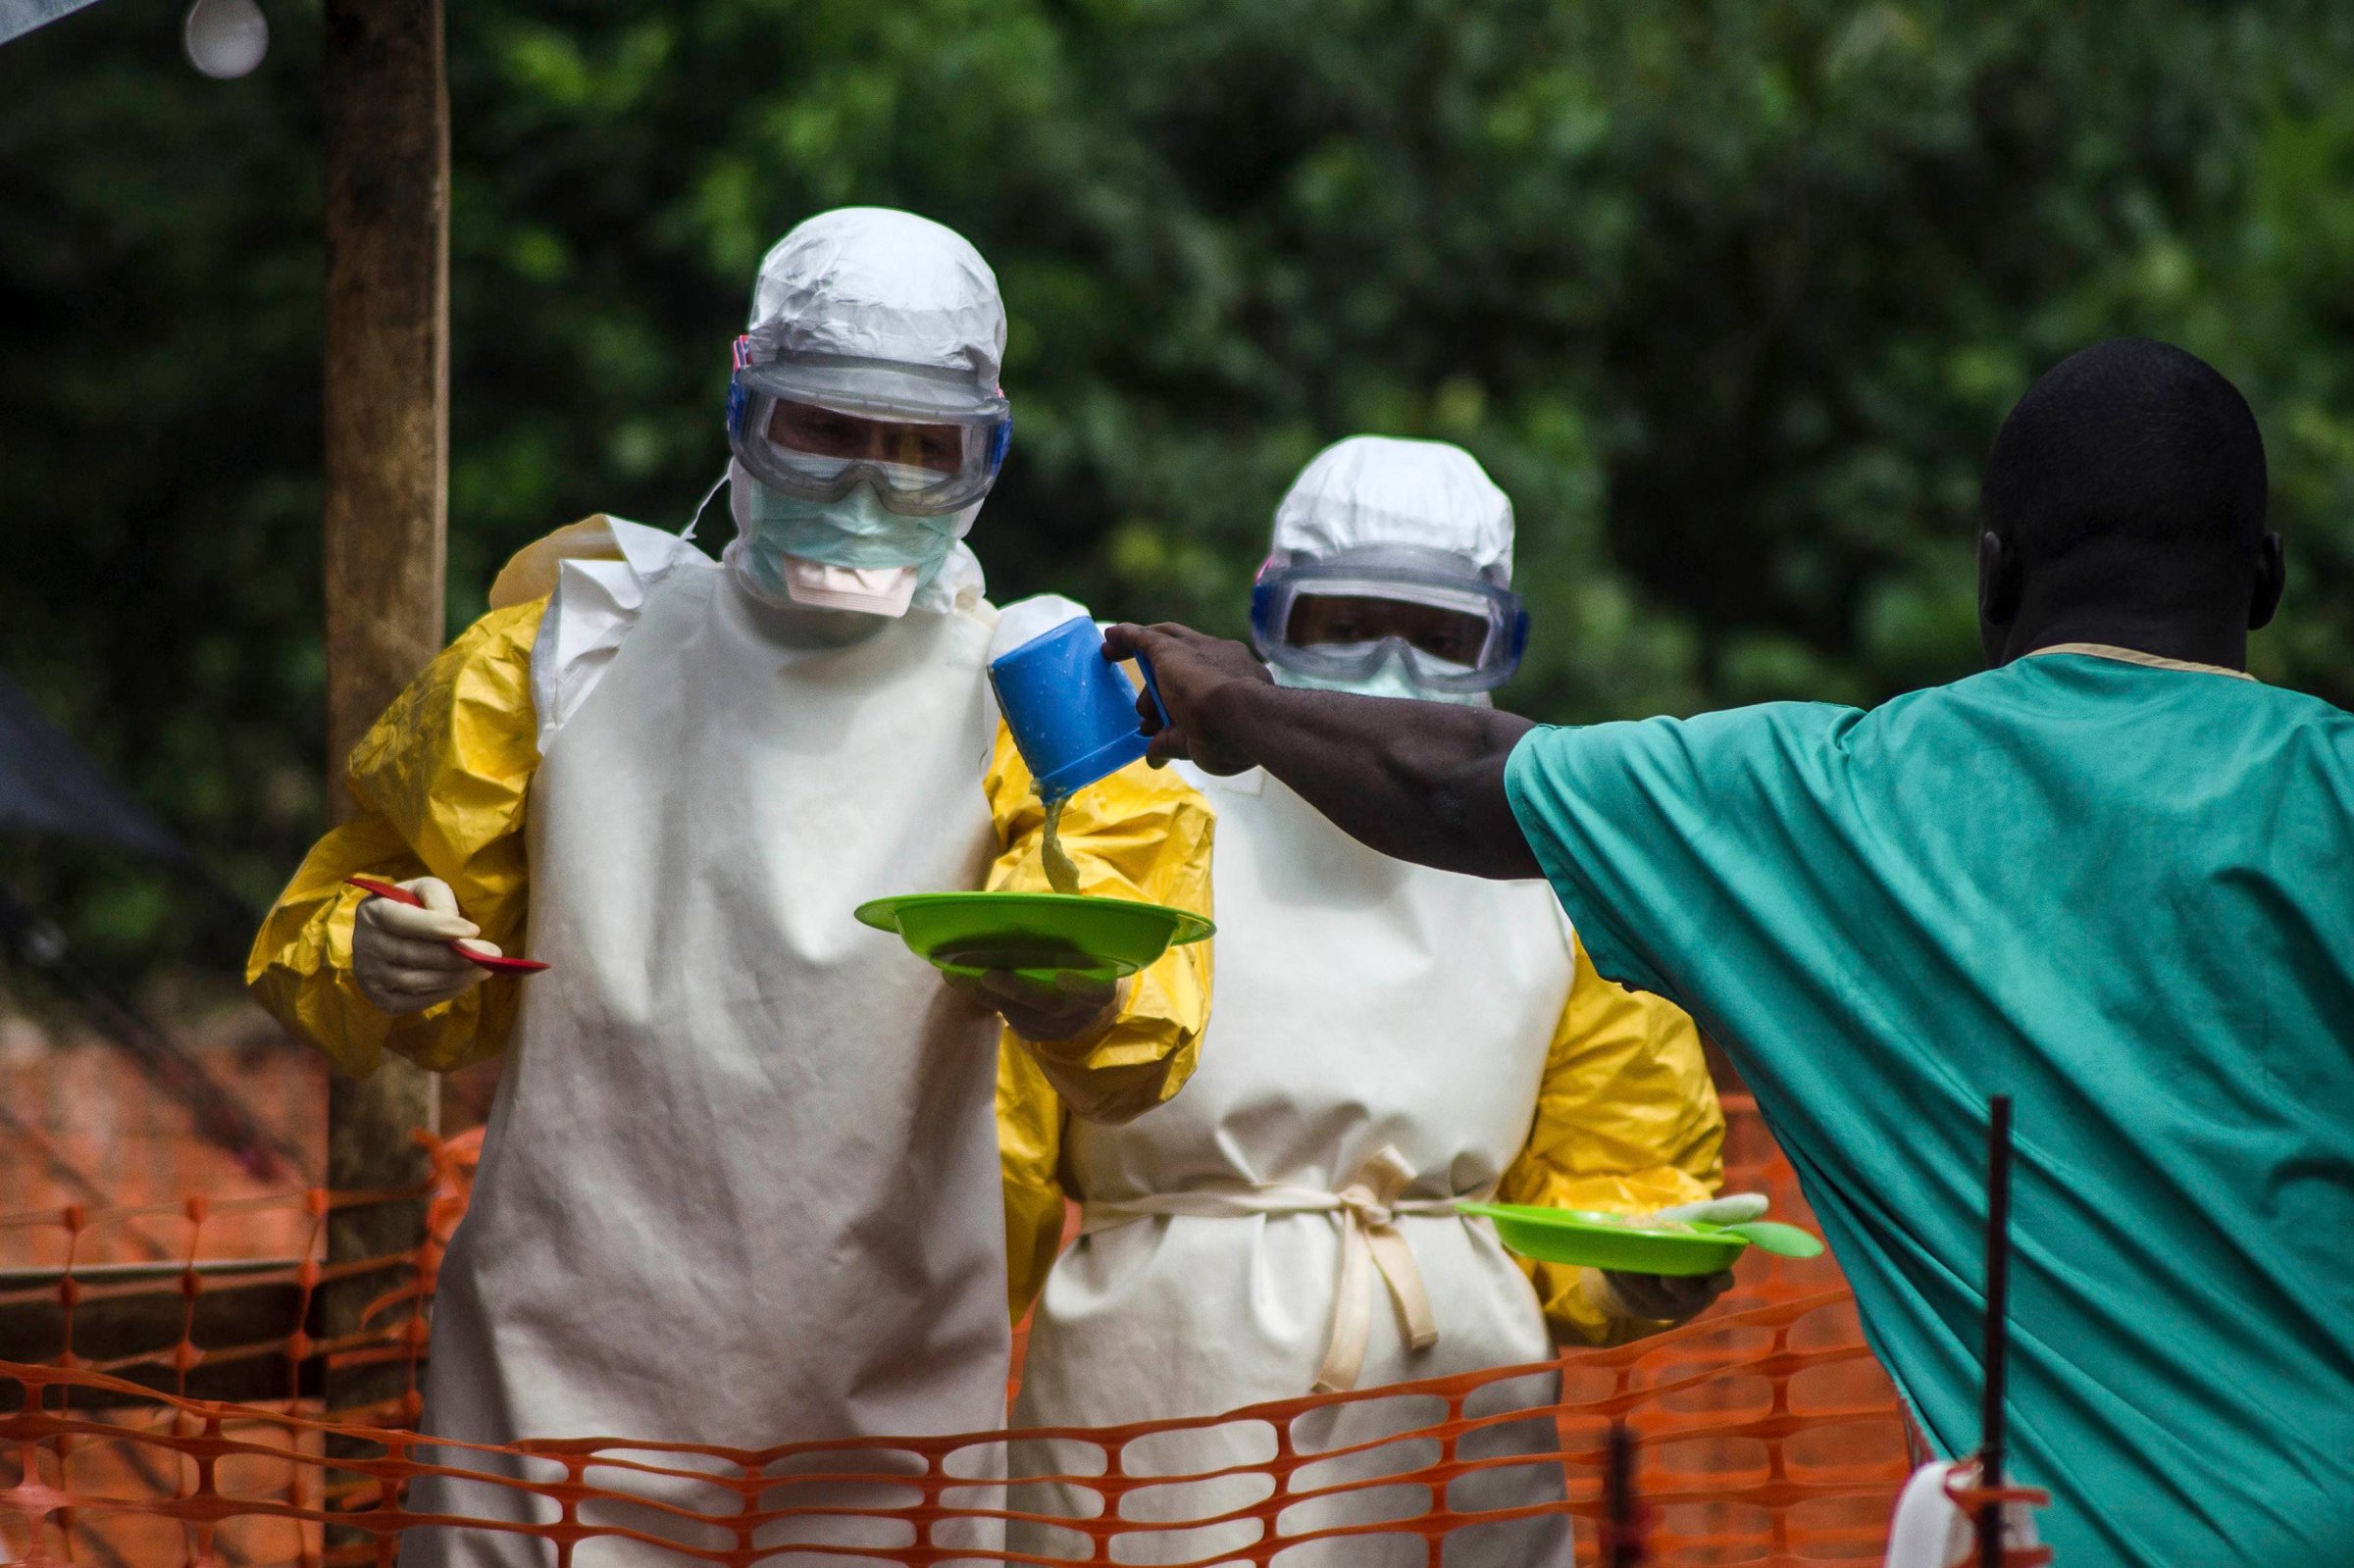 Medical staff working with Medecins sans Frontieres (MSF) prepare to bring food to patients kept in an isolation area at the MSF Ebola treatment centre in Kailahun, Sierra Leone on July 20, 2014.